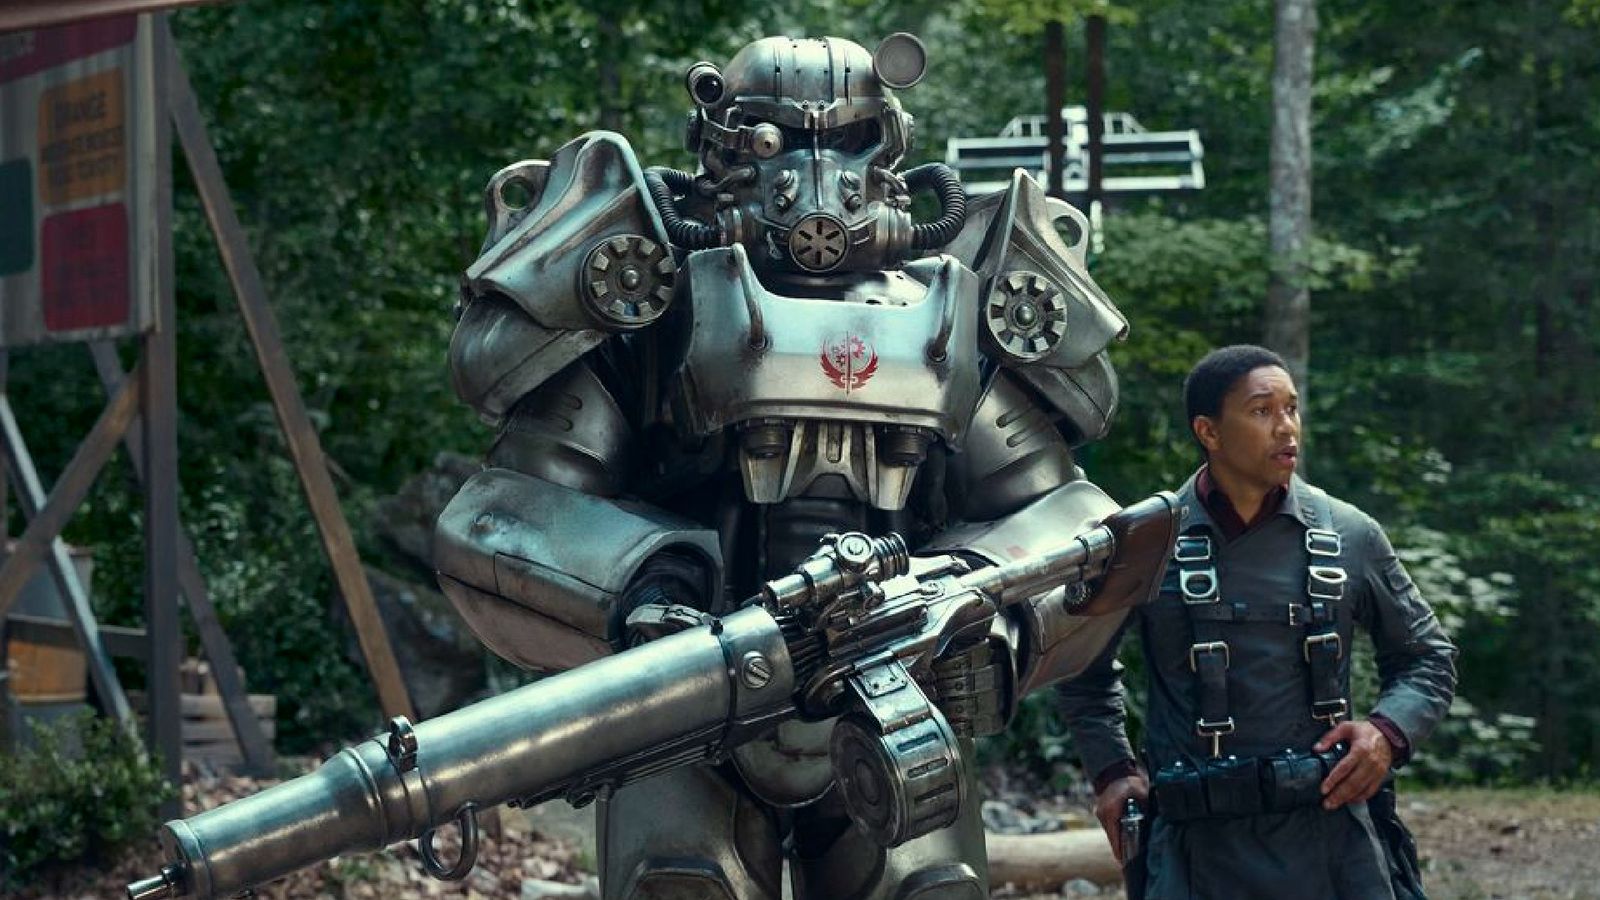 Power Armor standing central in the woods in Amazon's Fallout TV series